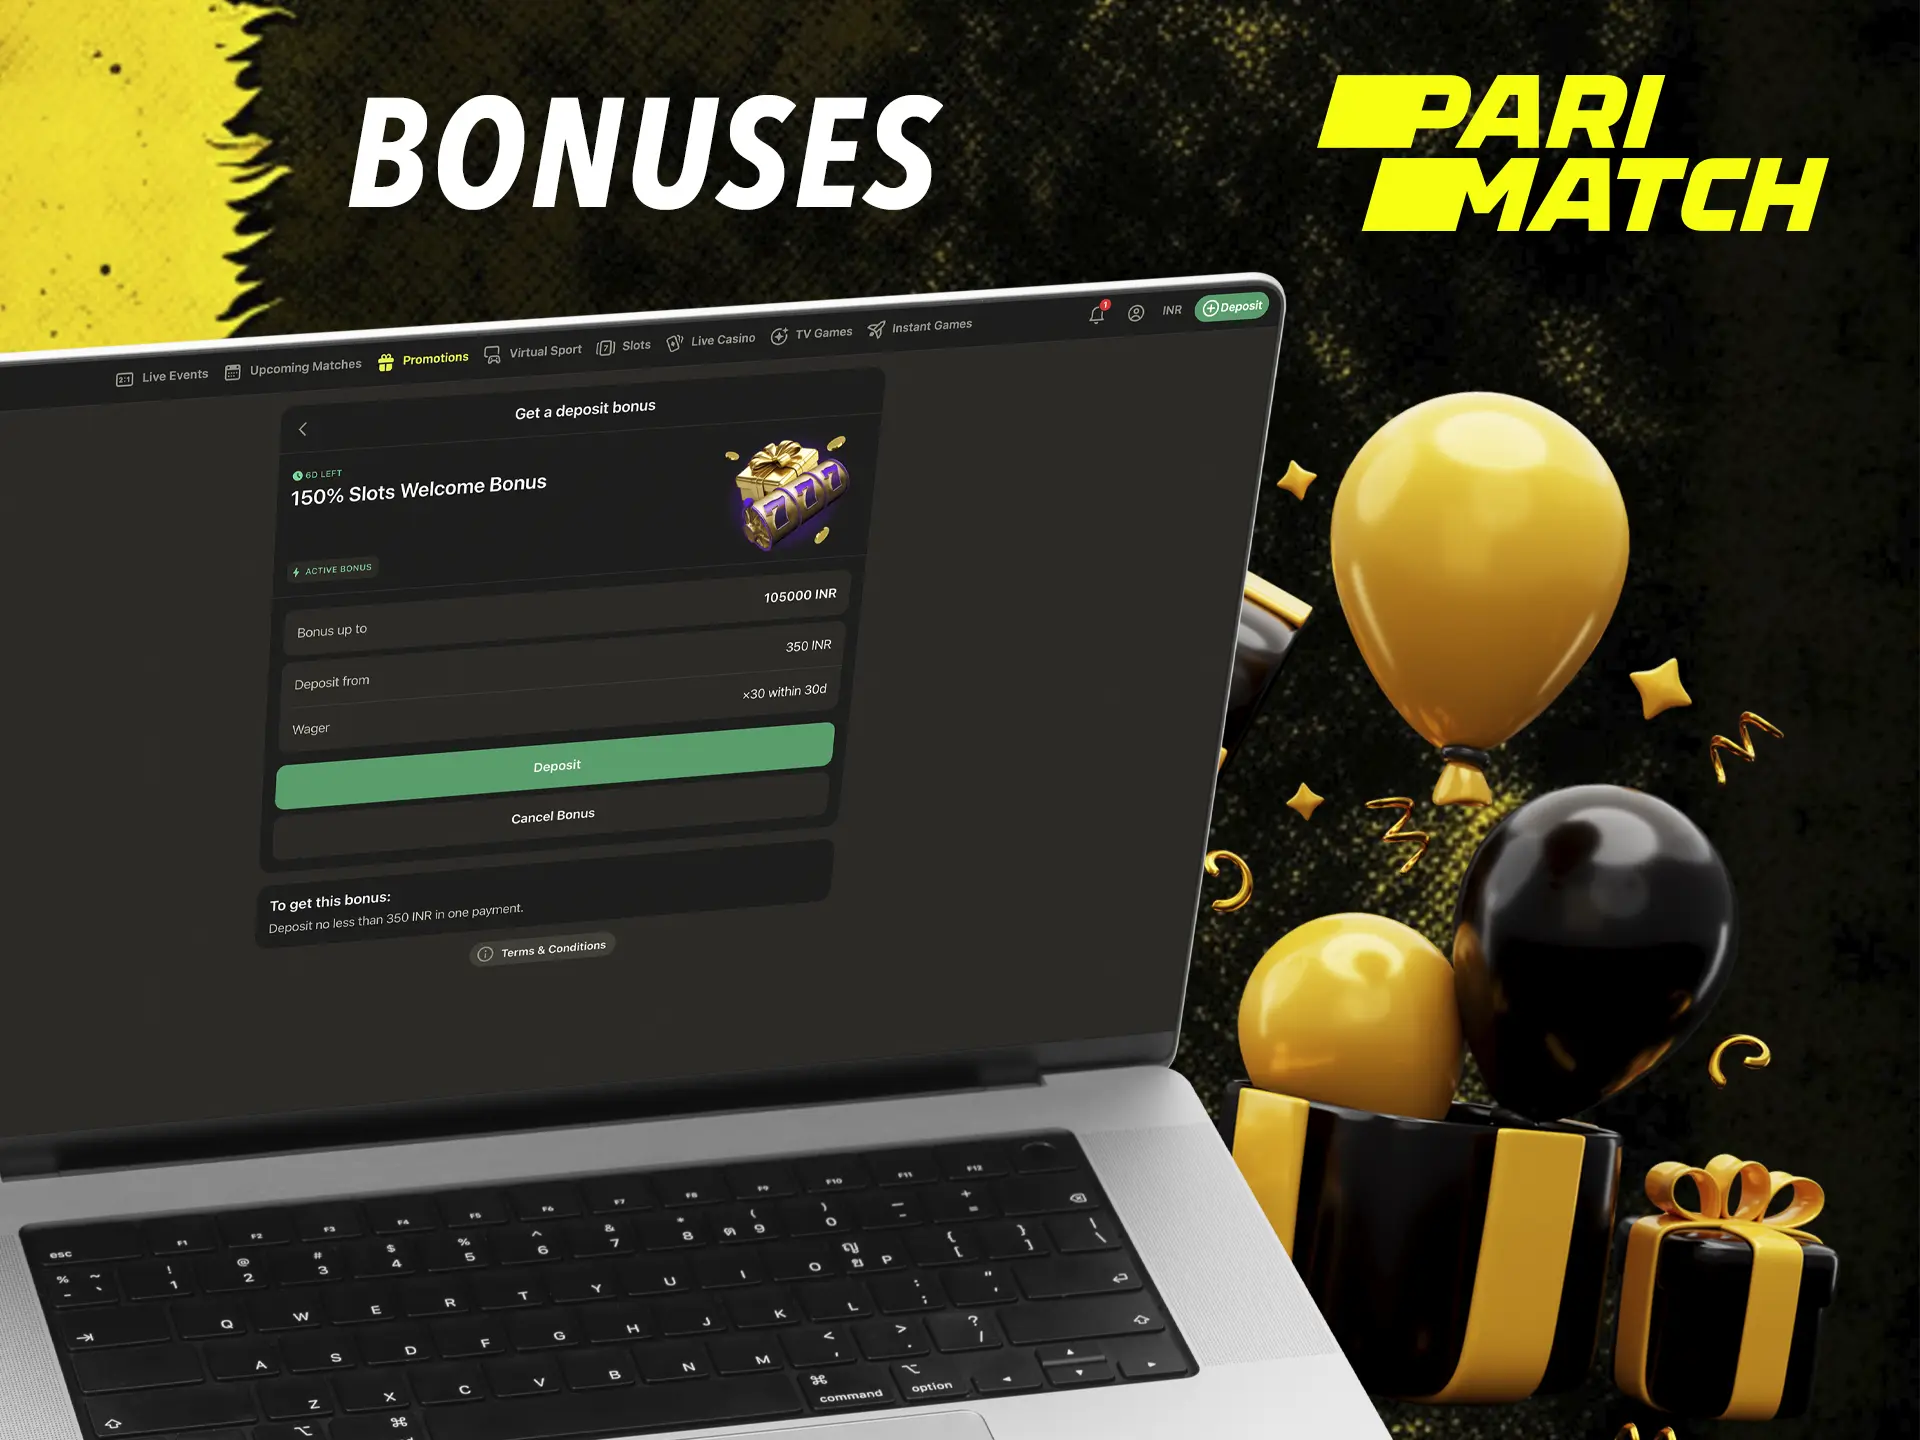 Don't miss the opportunity to claim your bonus immediately after registering at Parimatch, which will increase your deposit and give you free spins.